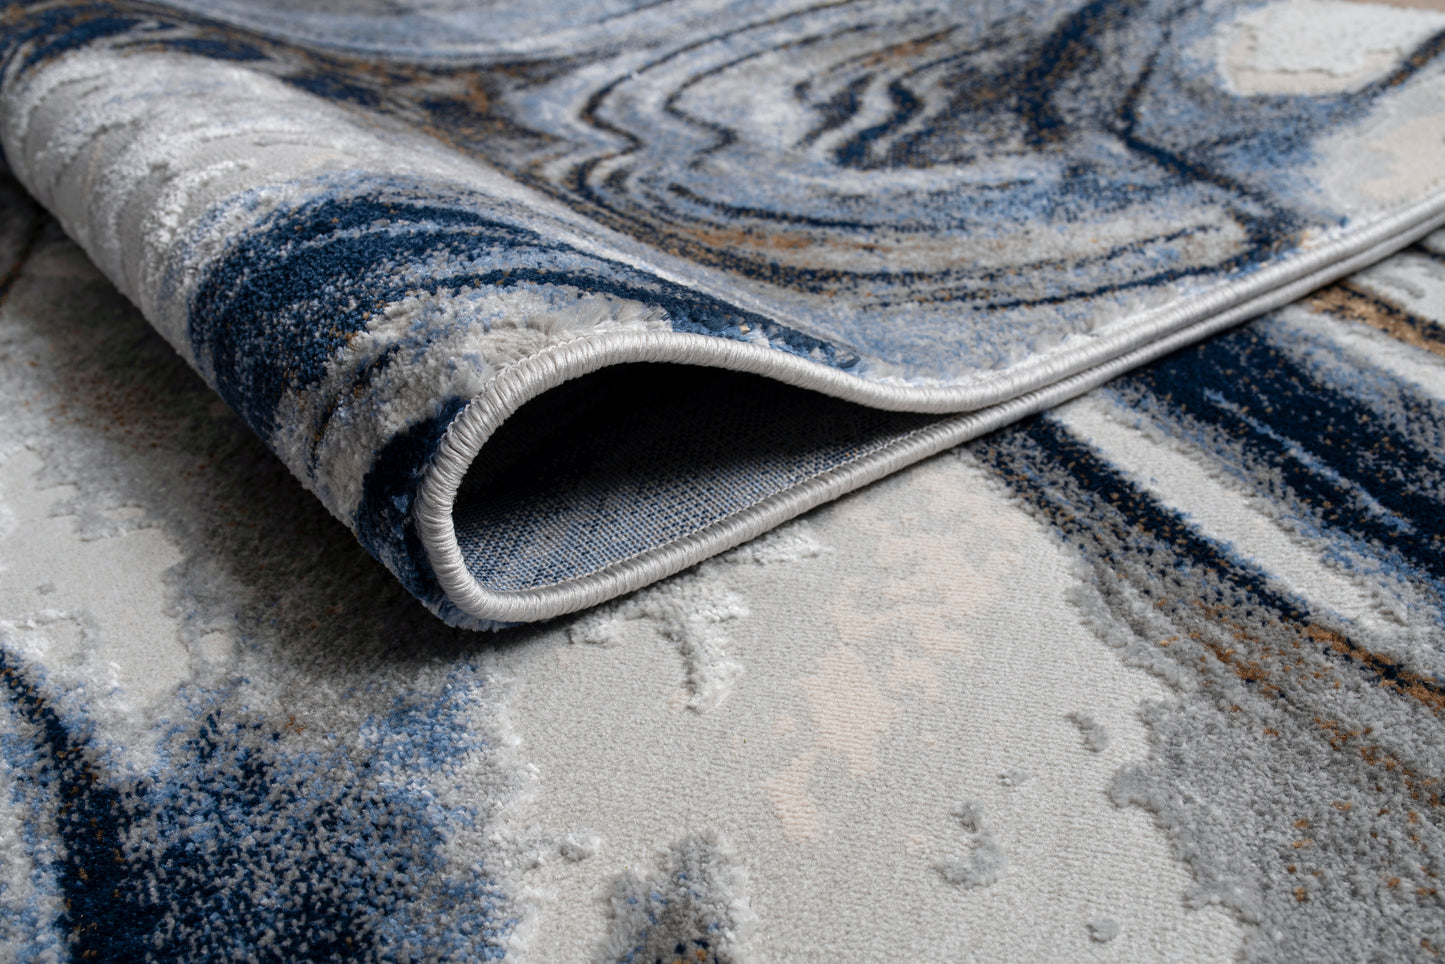 Blue Abstract Earth Living Room Bedroom Area Rug